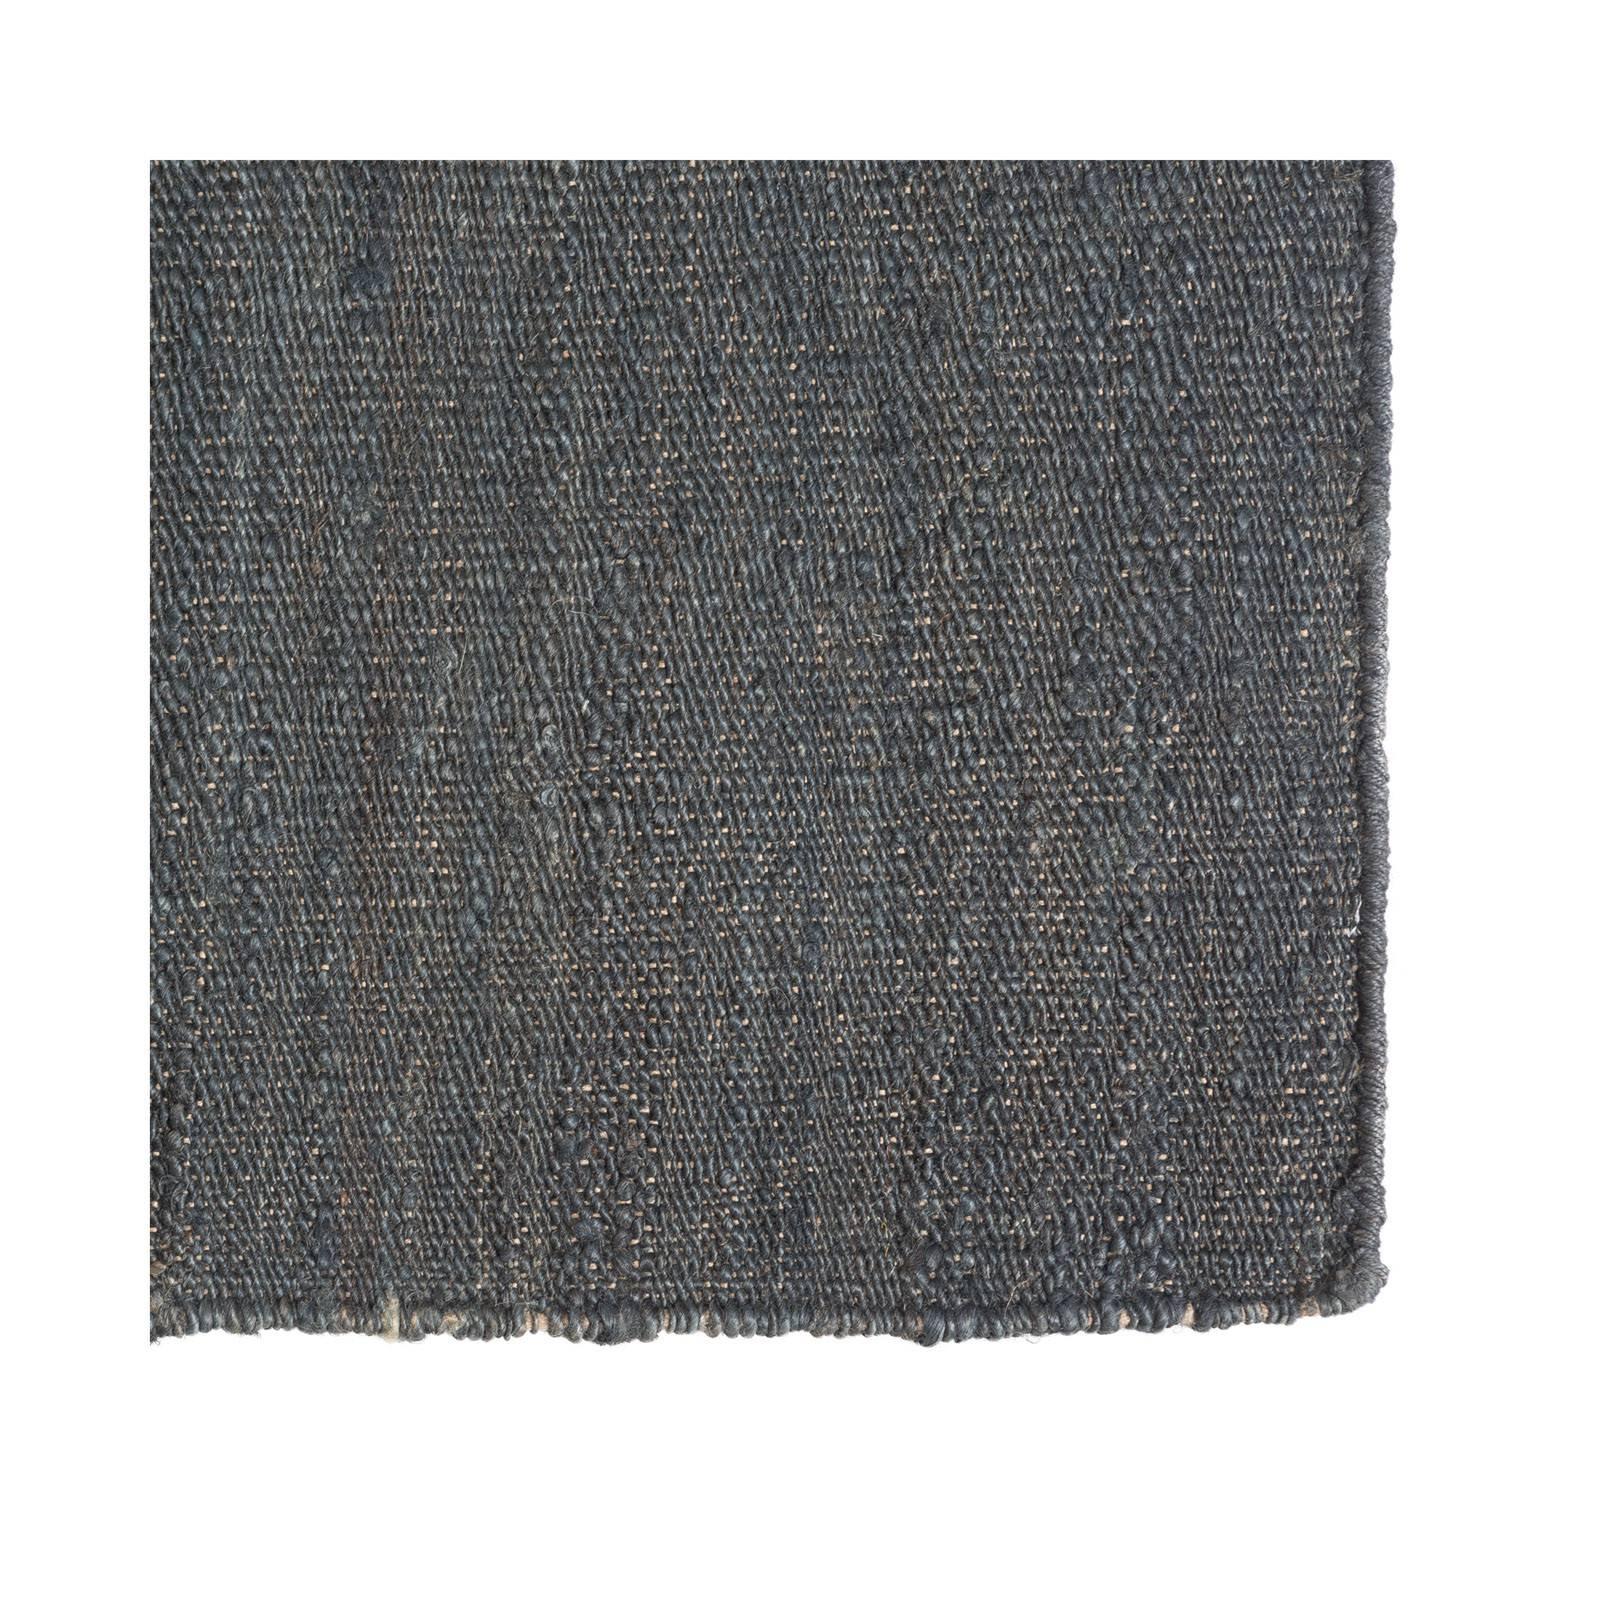 Hand-knotted jute rug. Handmade in India.